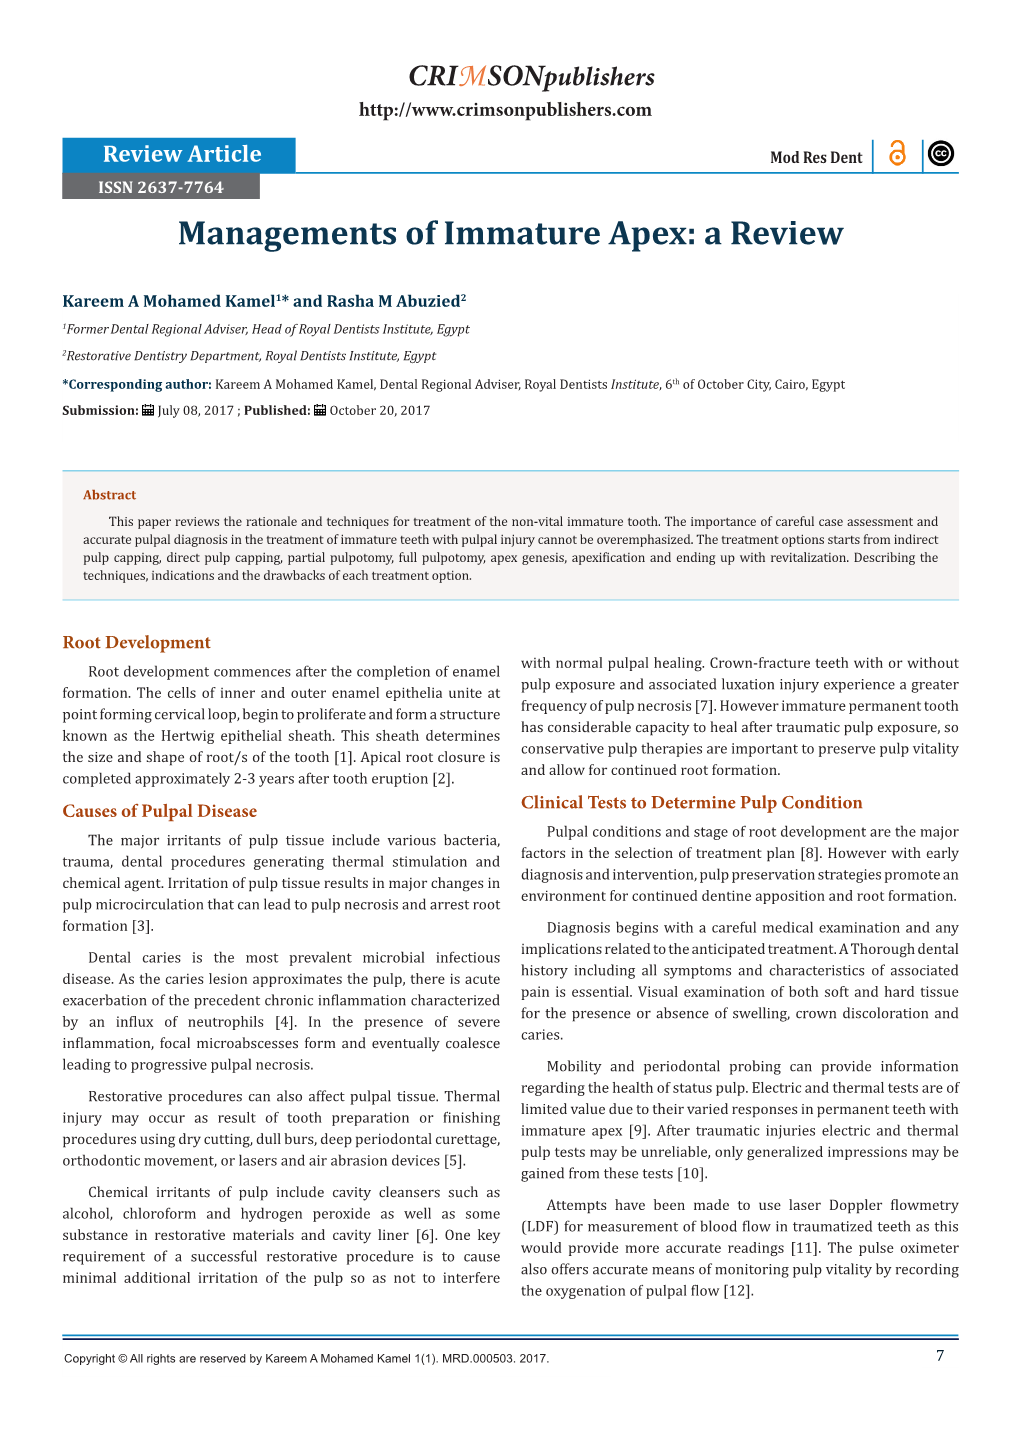 Managements of Immature Apex: a Review